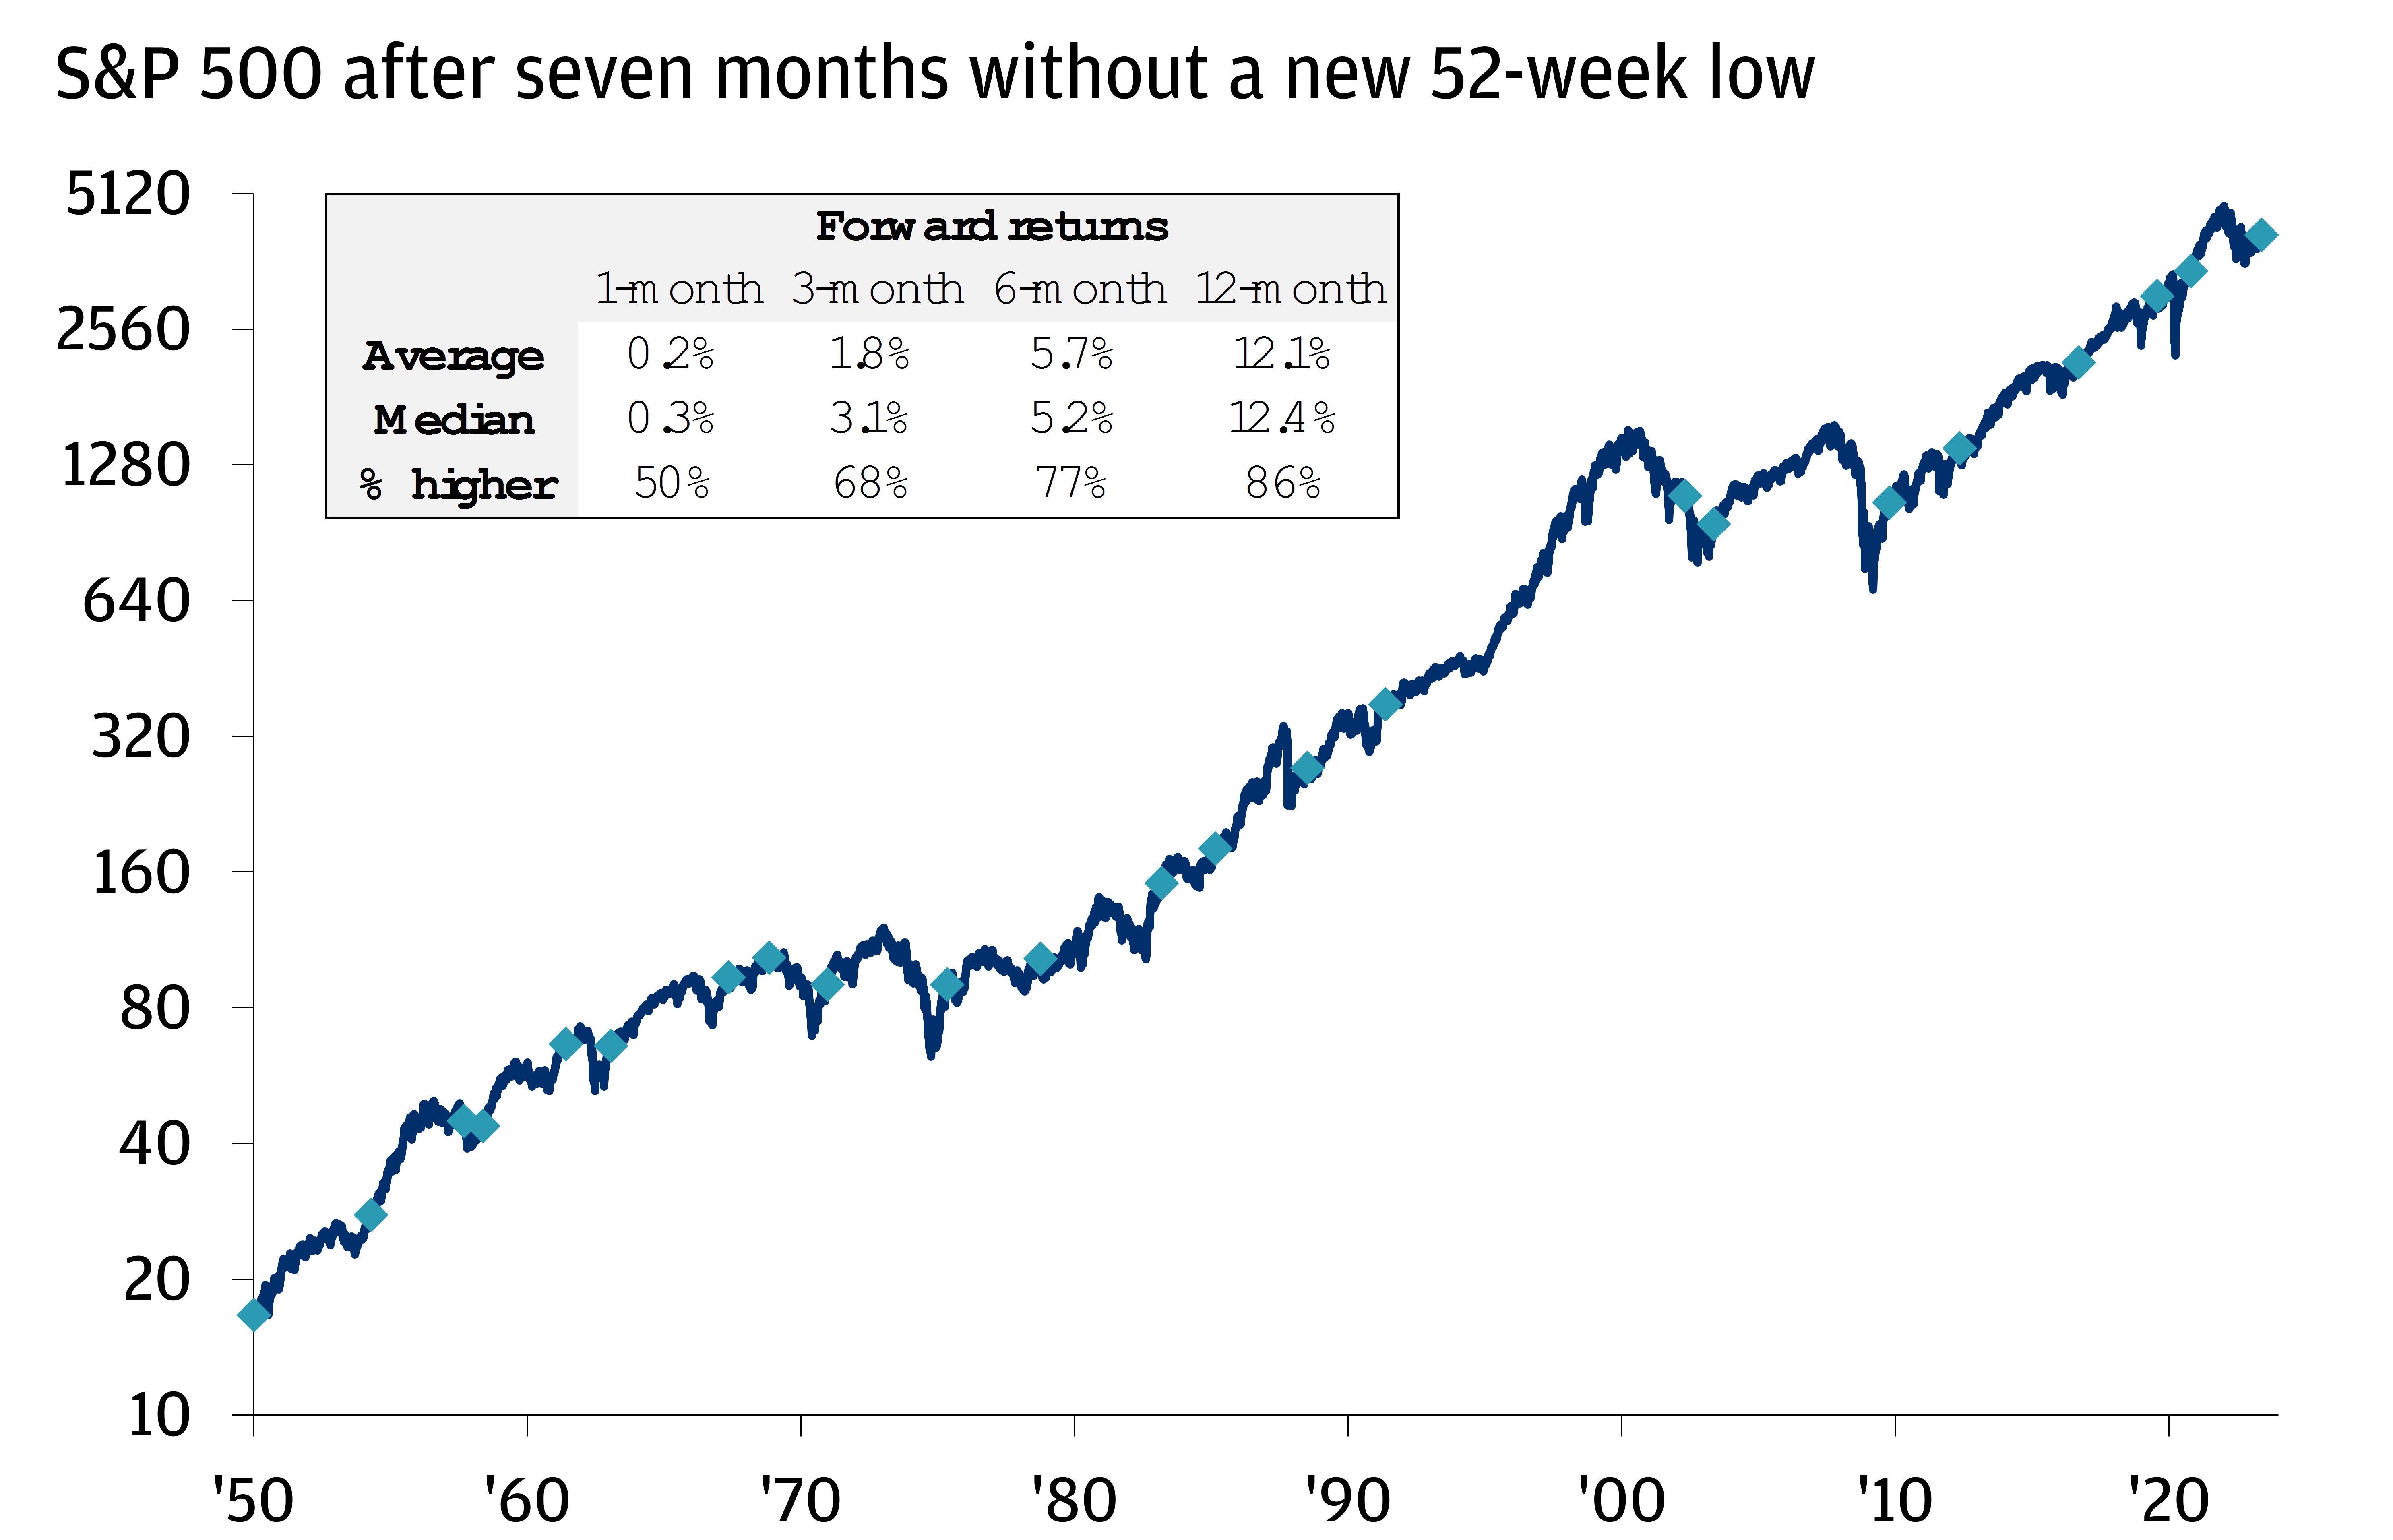 Chart shows the S&P 500 Index level from January 1950 through May 15, 2023.